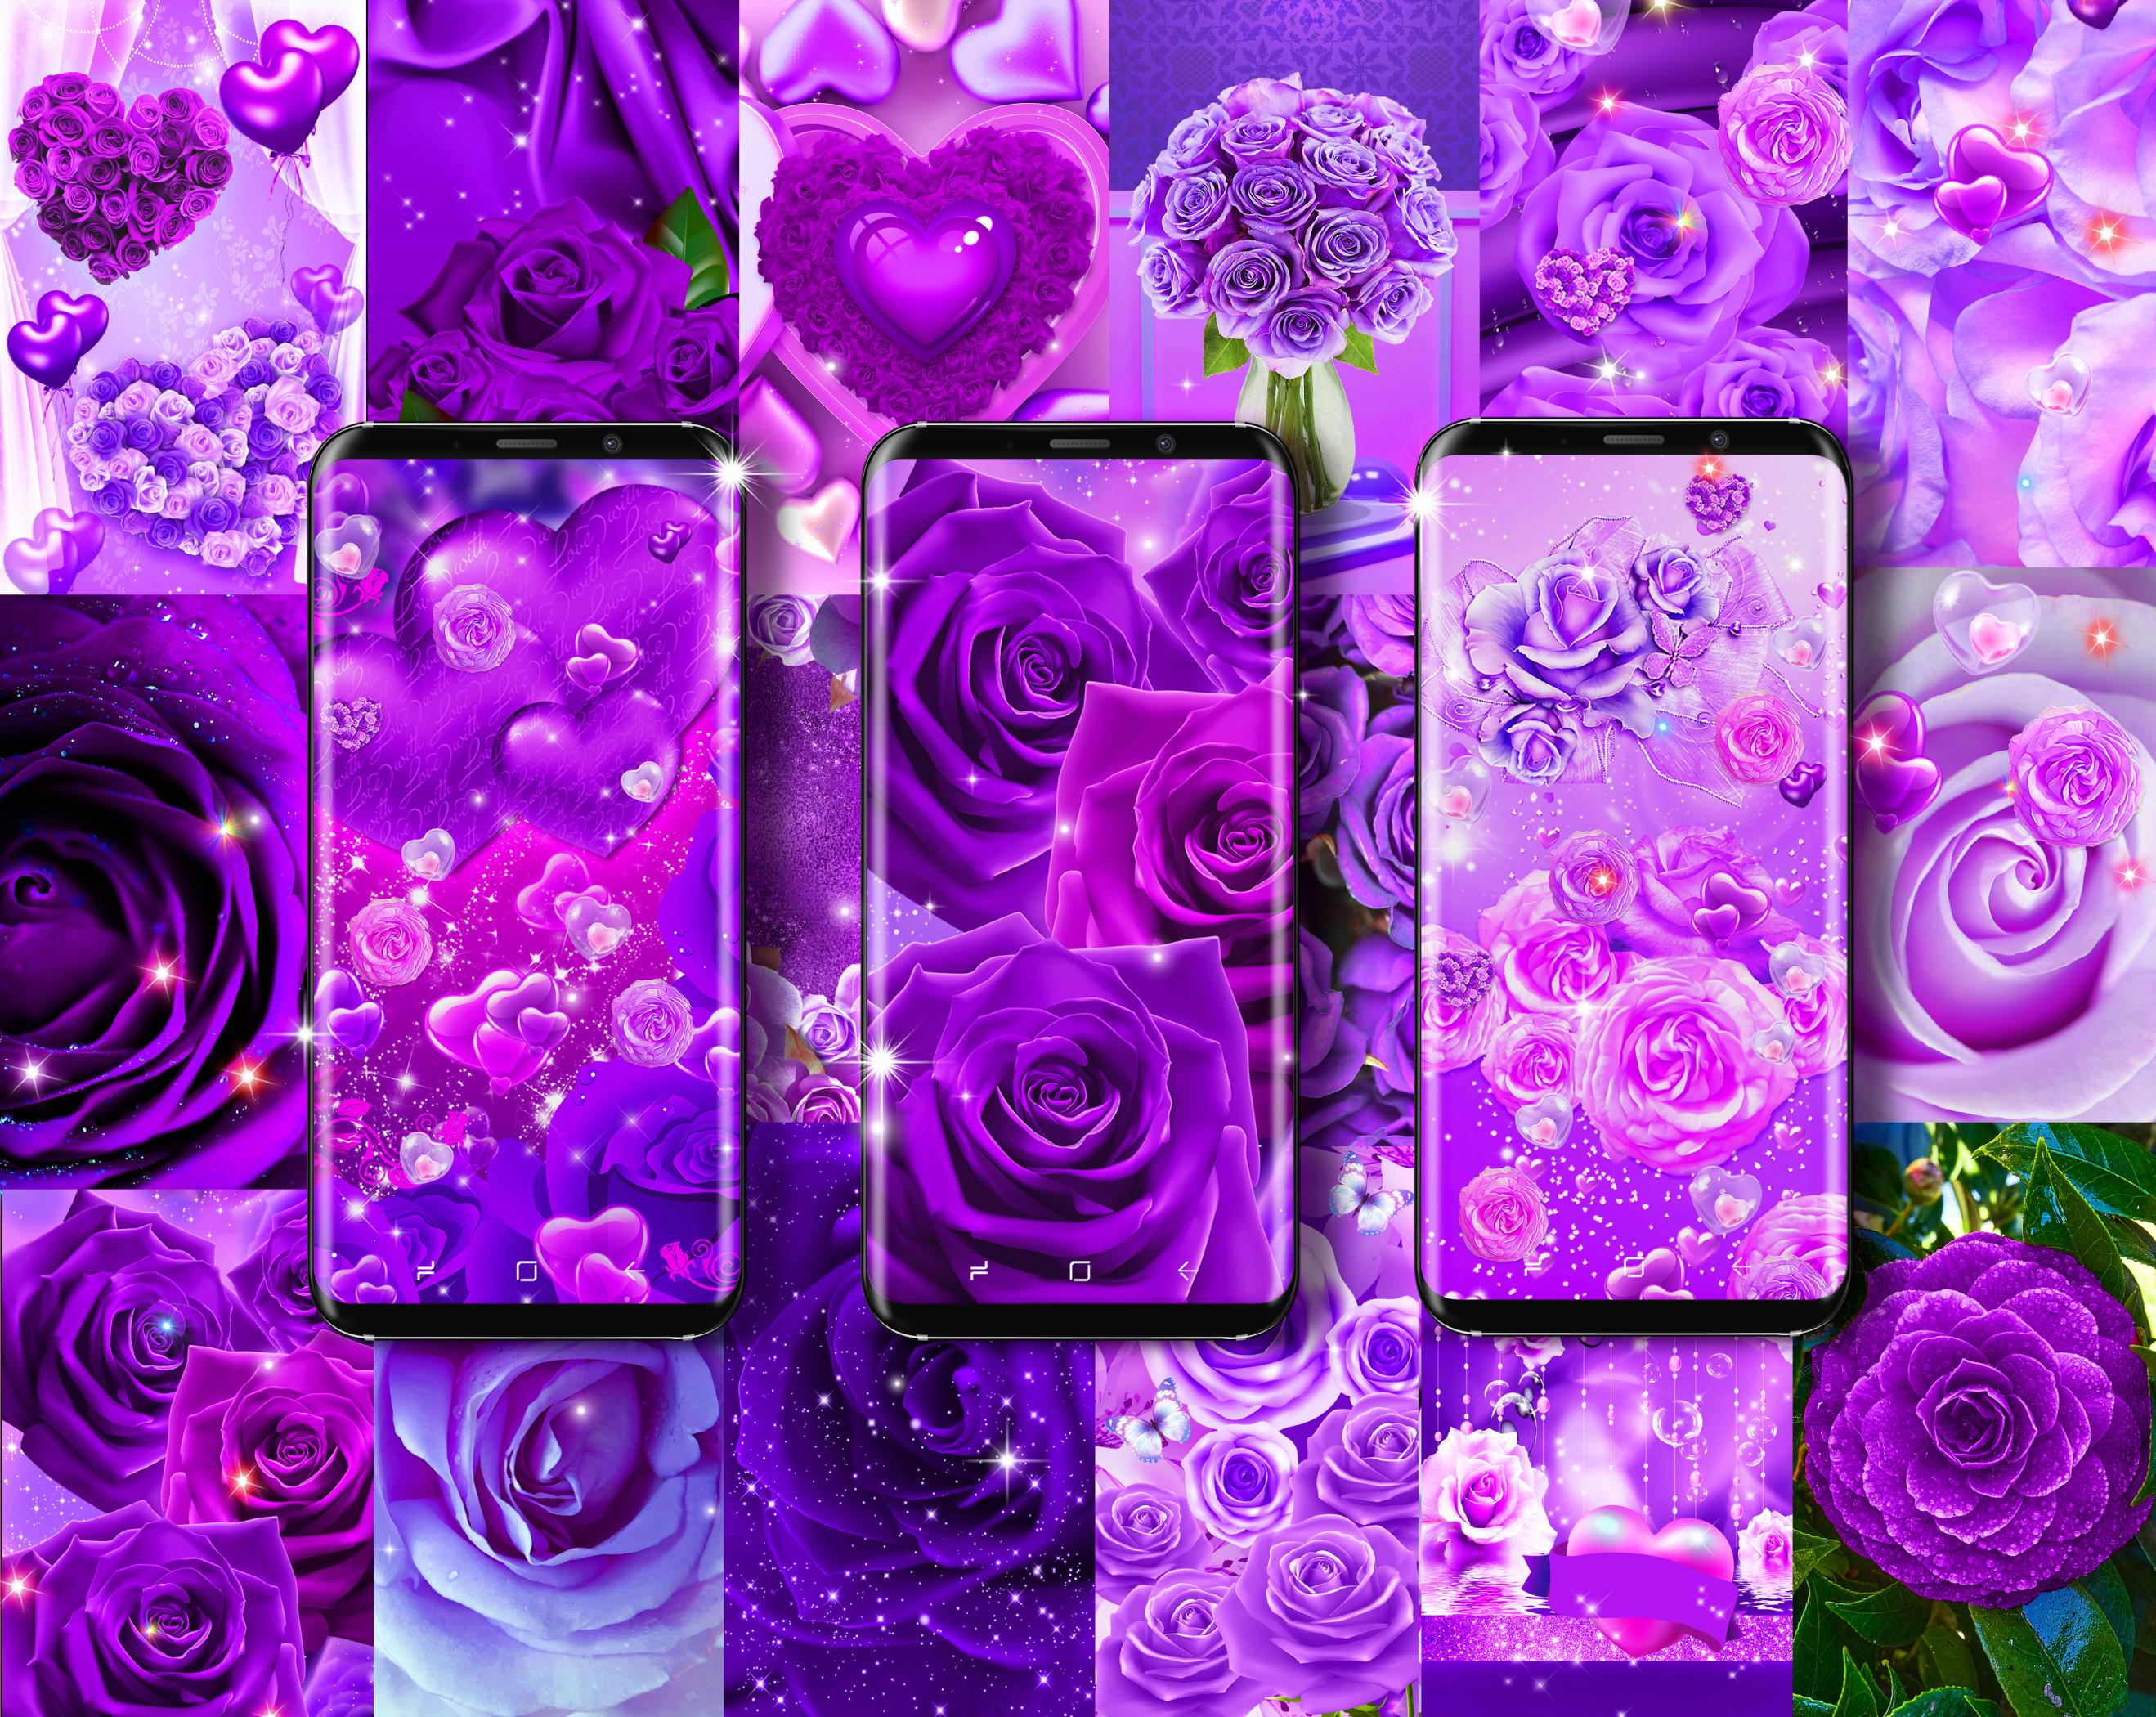 Purple rose love live wallpaper for Android   APK Download